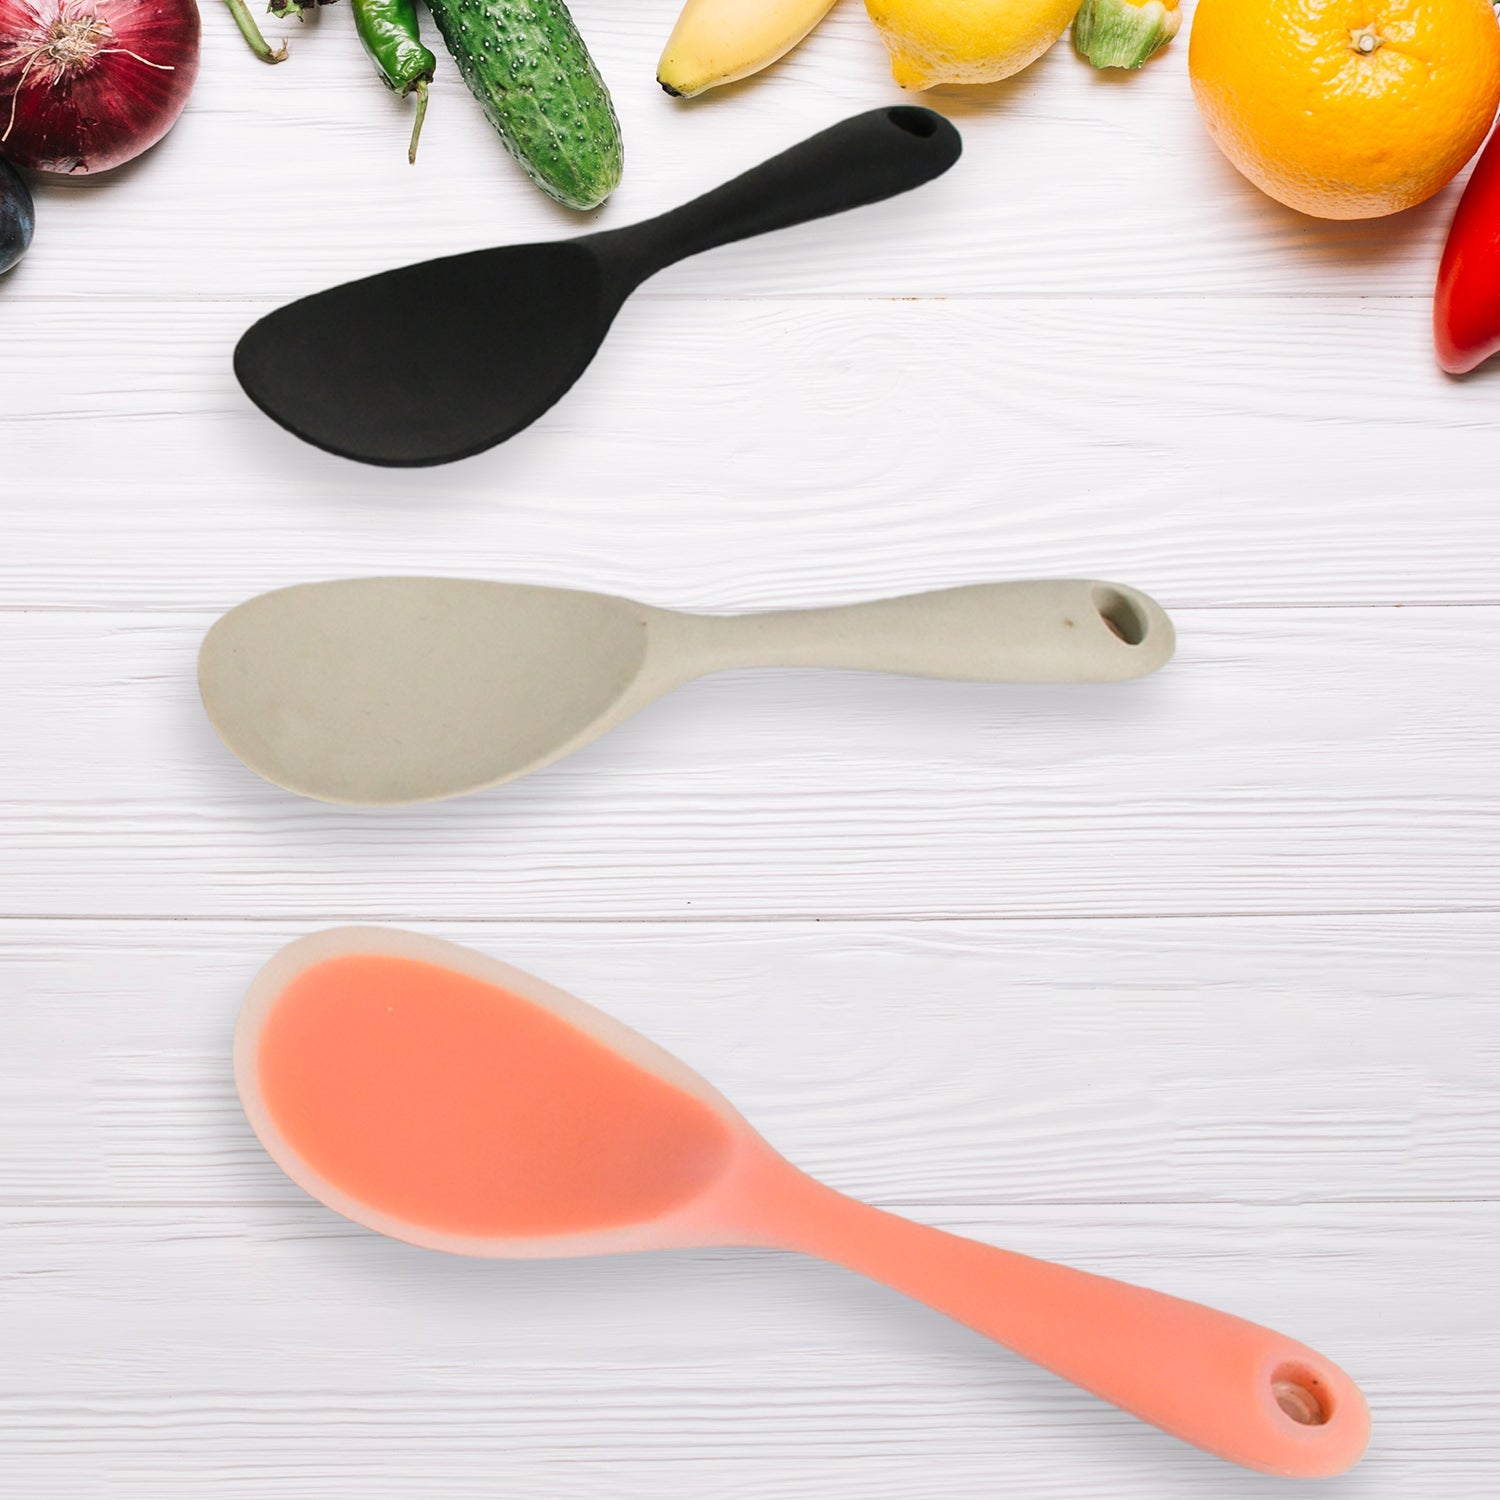 5620 Silicone Rice Paddle Spoon Non Stick Rice Spoon Heat-Resistant Kitchen Gadge Rice Spoon with Hanging Hole Perfect for Rice Mashed Potato (6 pcs set / 22 cm)